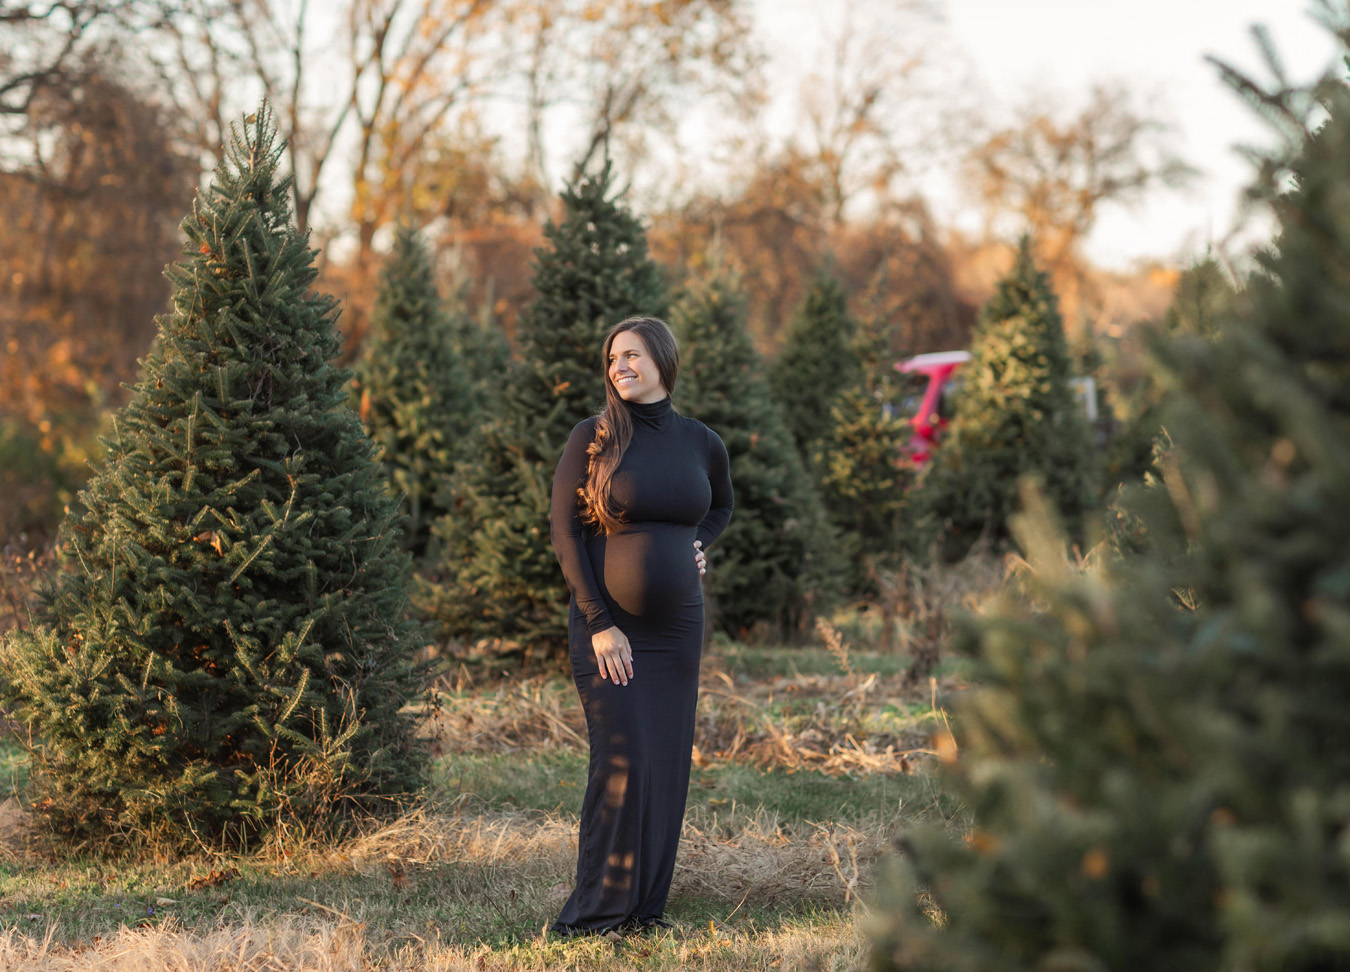 Christmas Maternity Photoshoot in Northern Virginia featuring a pregnant woman smiling at a tree farm.